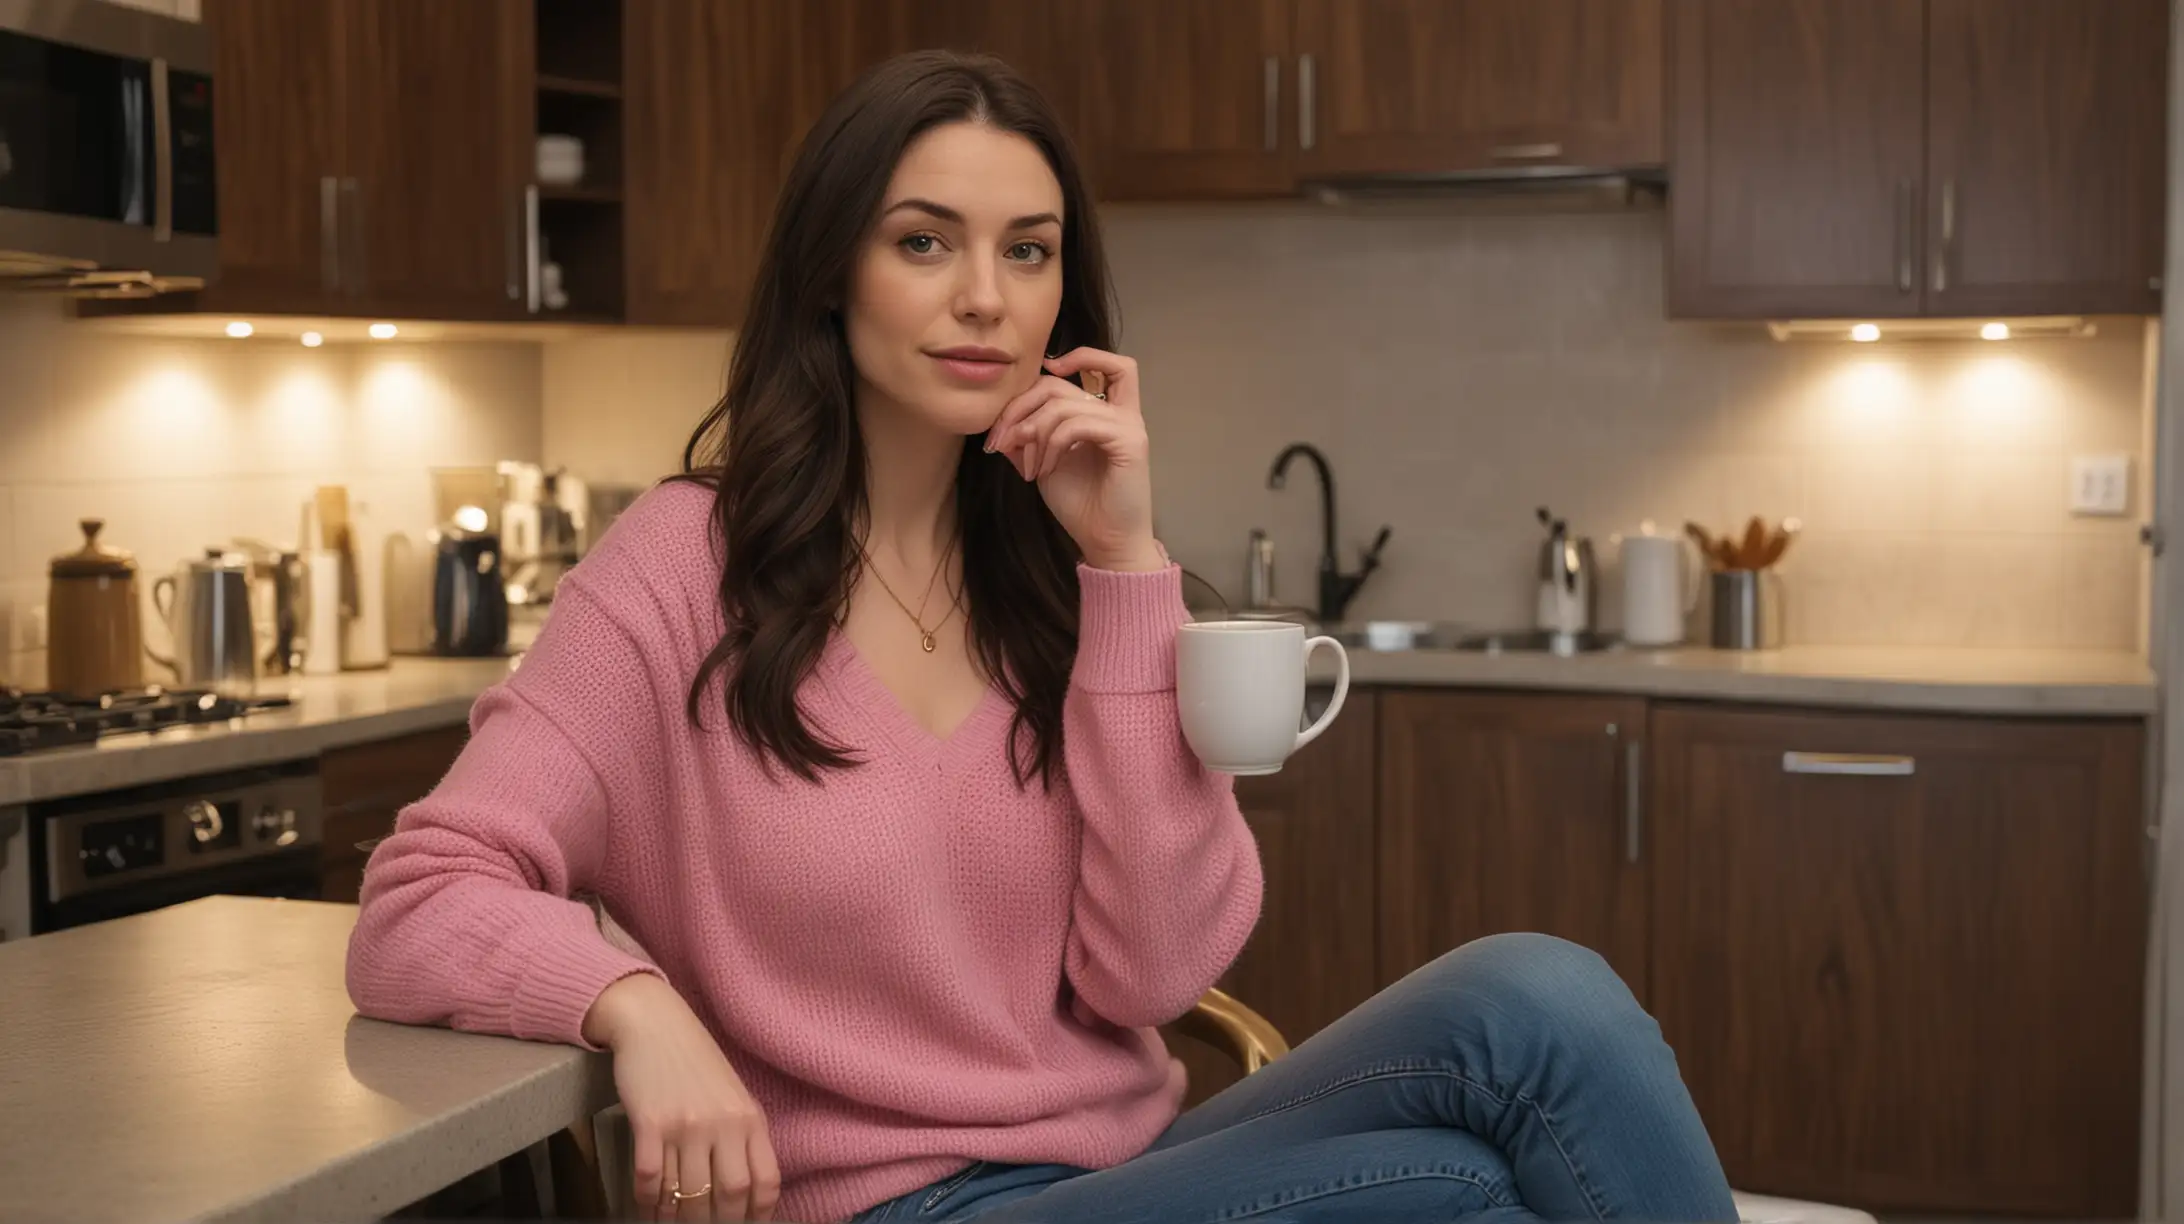 30 year old pale white woman with long dark brown hair parted to the right, wearing a gold necklace, pink sweater and blue jeans. She is sitting in a chair at a kitchen table with exactly one mug of hot tea, dense urban high rise apartment background at nighttime.